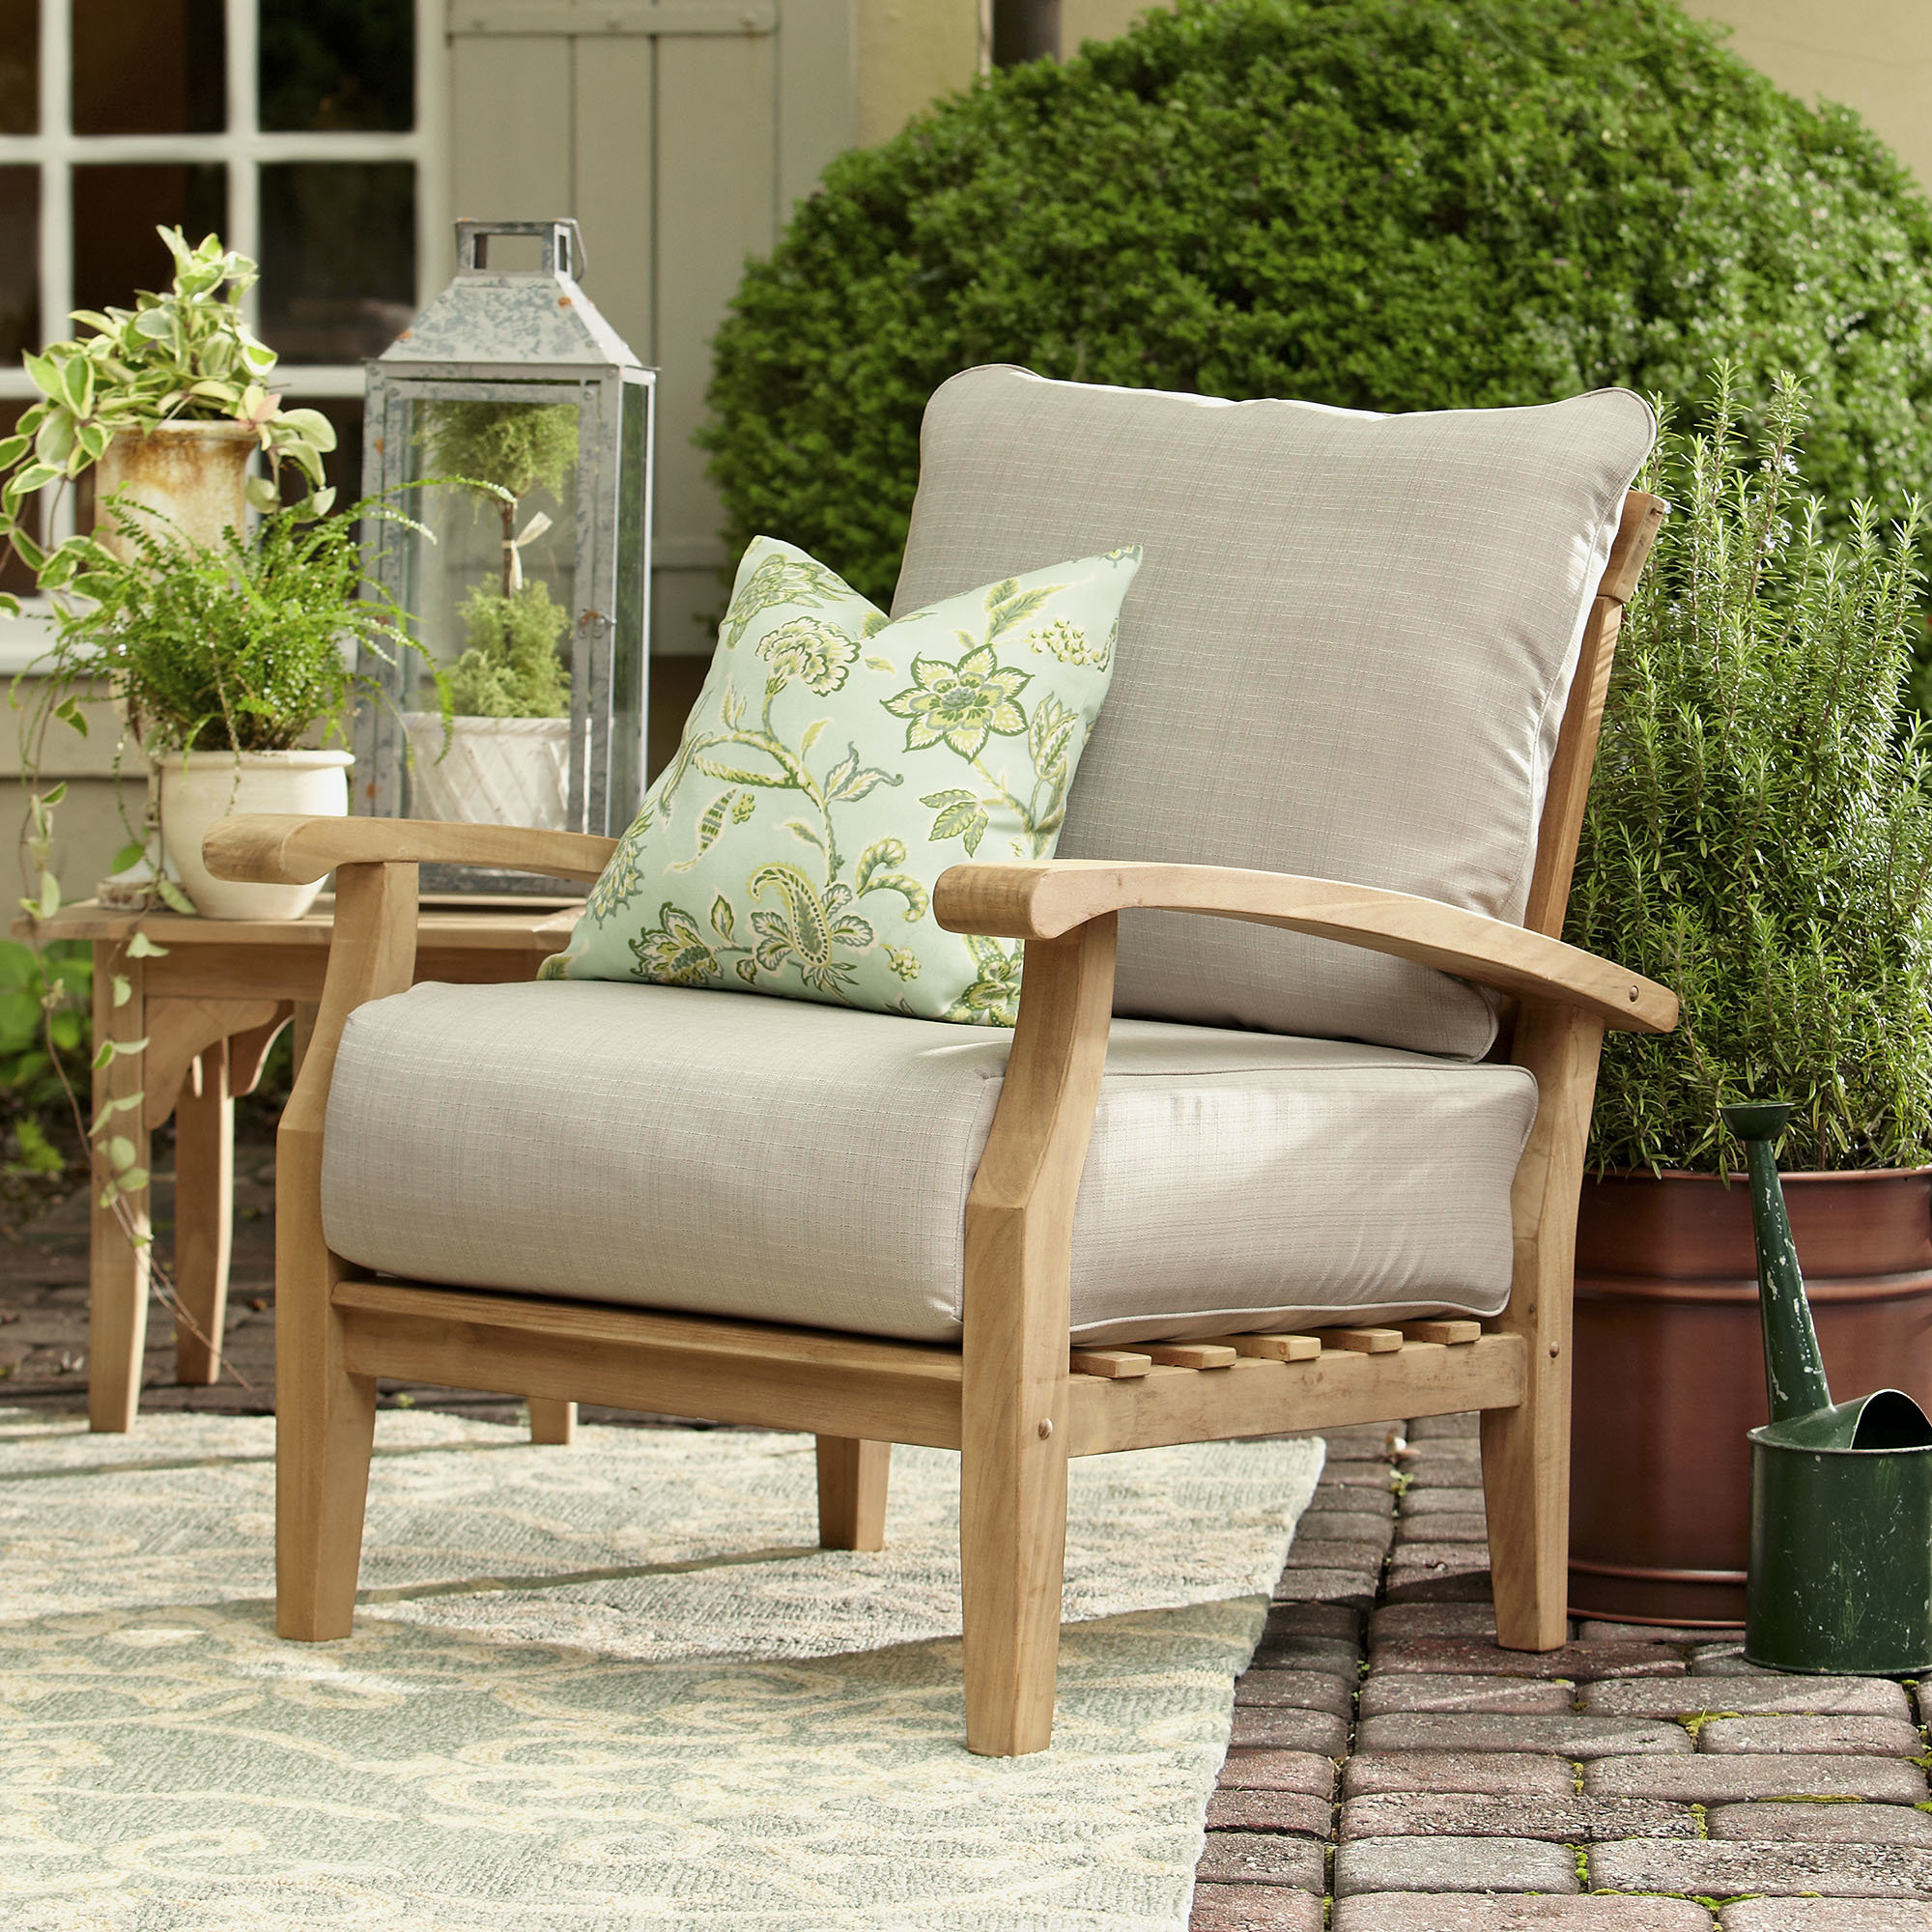 10 Best Teak Furniture Options For Outdoor Spaces